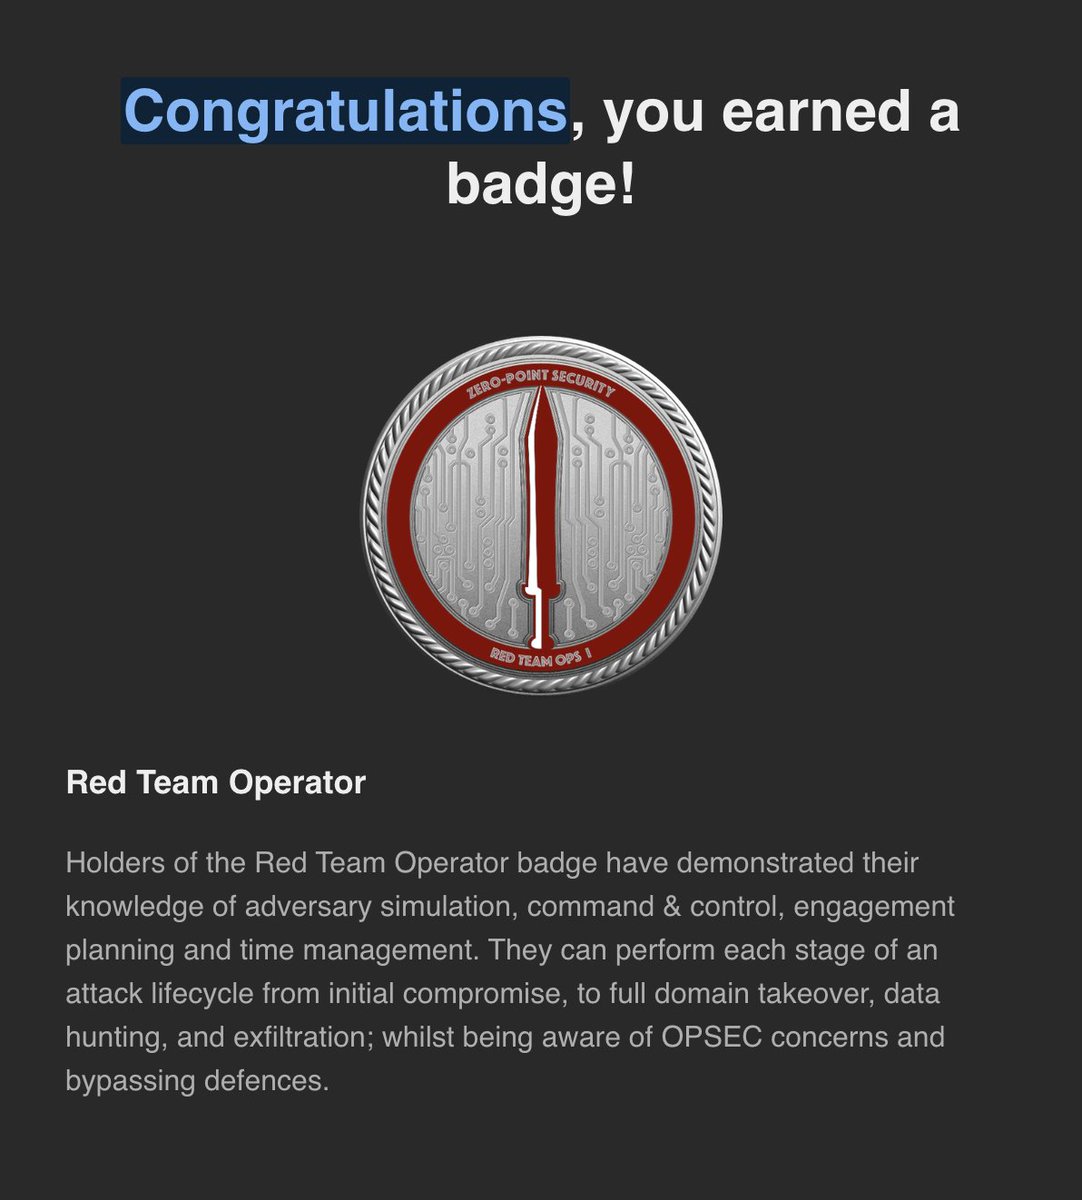 Glad to share that I've completed CRTO by @zeropointsecltd It provides a hands-on experience with the Cobalt Strike C2 framework, covering every aspect of red teaming. #CyberSecurity #CRTO #redteam #vapt #opsec #zeropointsecurity #cobaltstrike